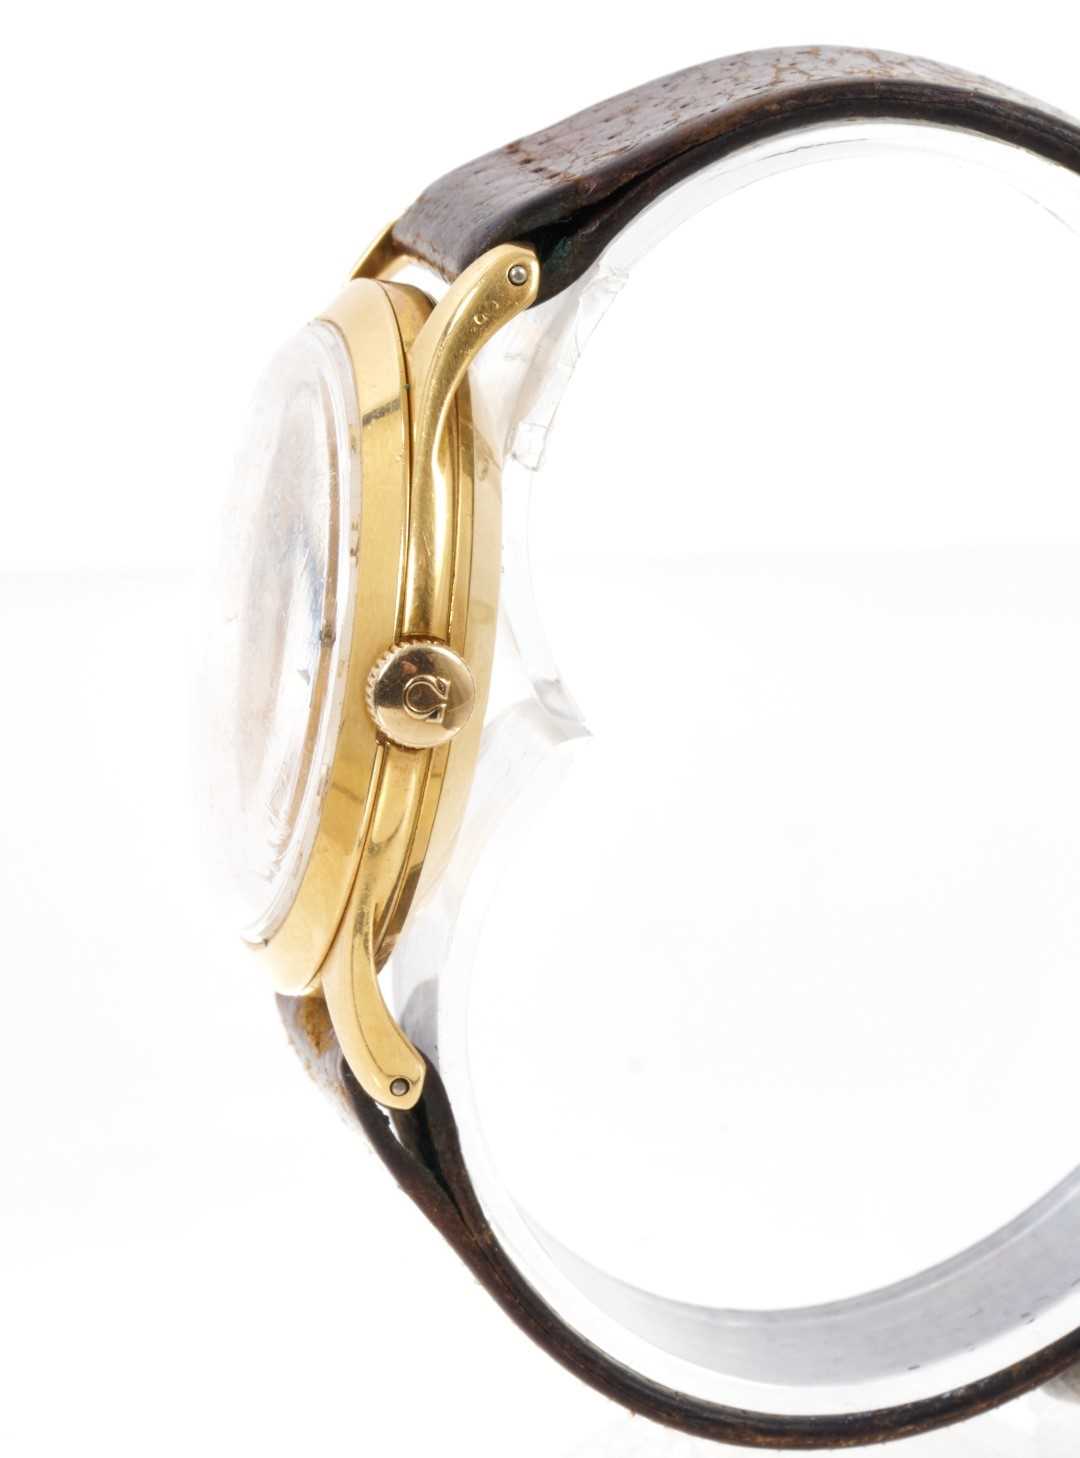 1950s Gentlemen's Omega 18ct gold wristwatch with manual-wind 283 calibre 17 jewel movement numbered - Image 3 of 10